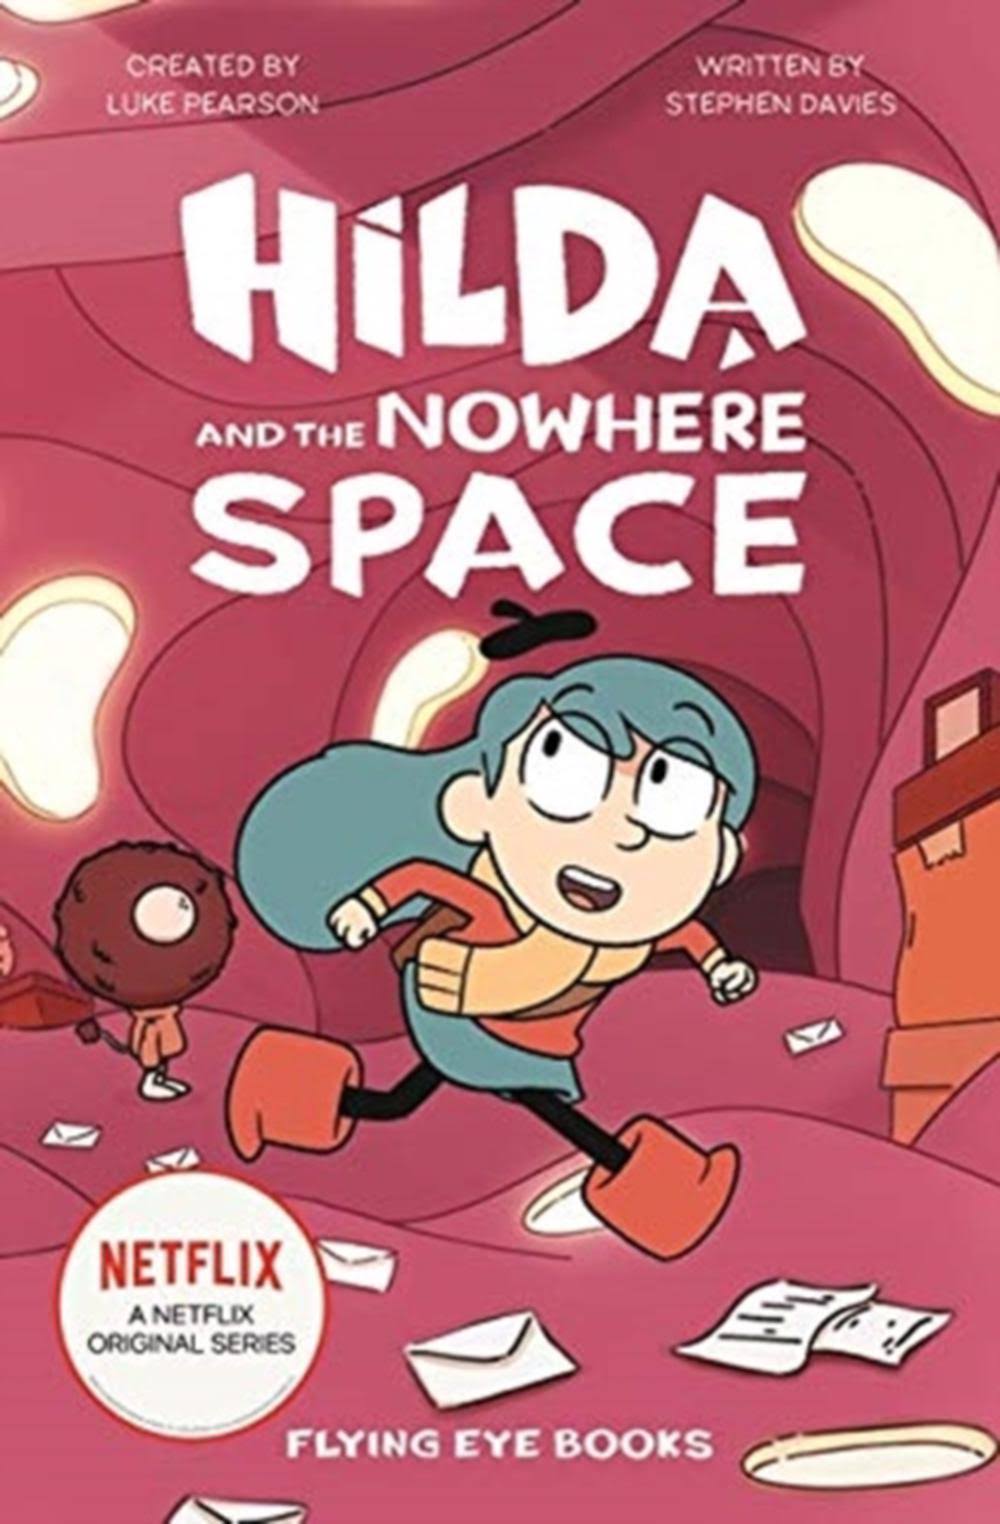 Hilda and the Nowhere Space [Book]